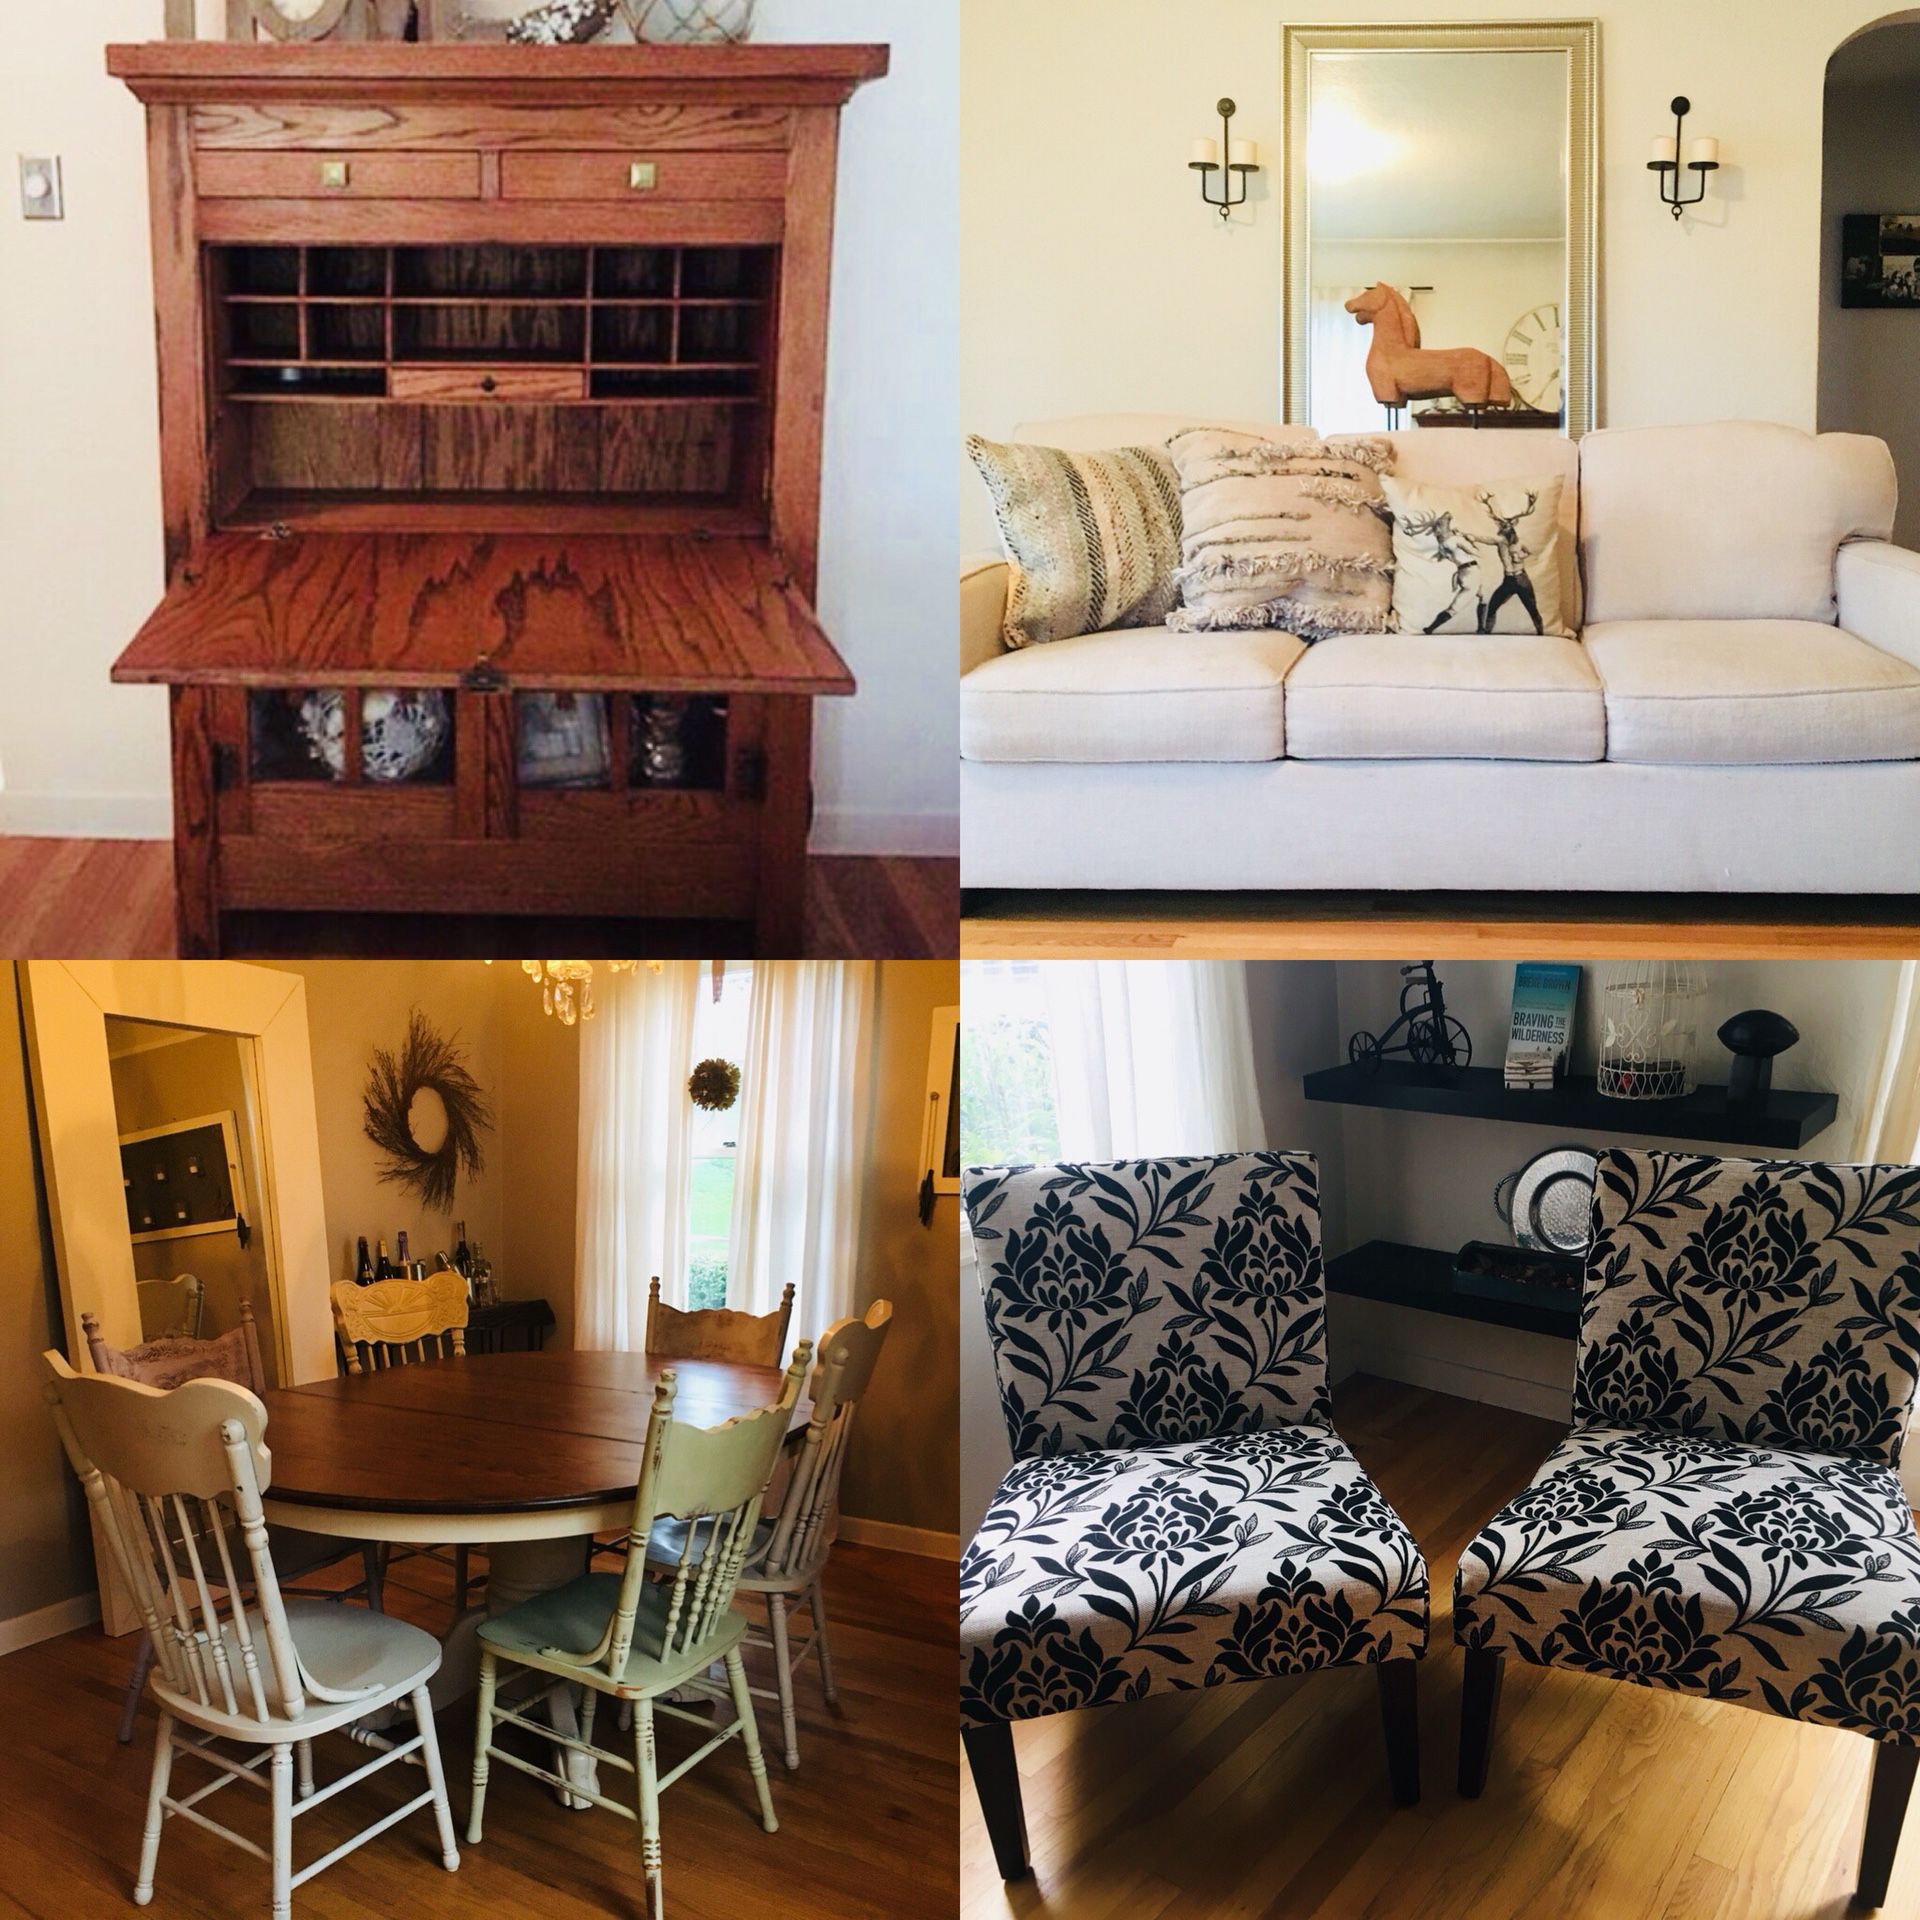 Furniture Sell! Antique Secretary, White tweed/linen couch, Refurbished Country Farm table w/6 chairs, Two Accent chairs